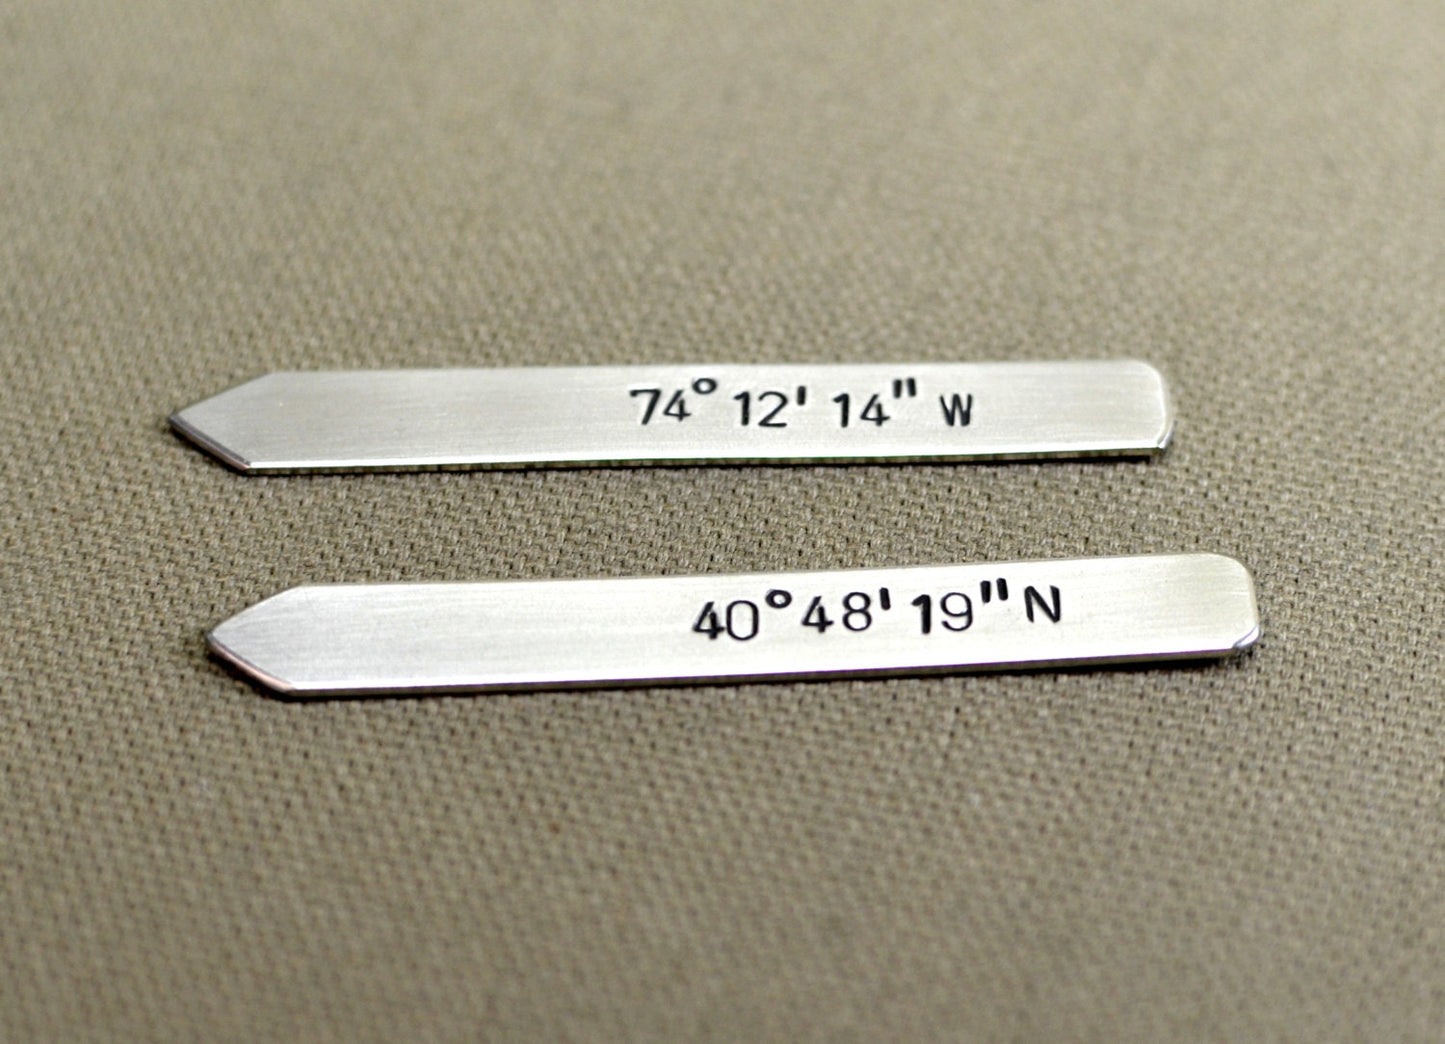 Latitude and longitude personalized special place sterling silver collar stays